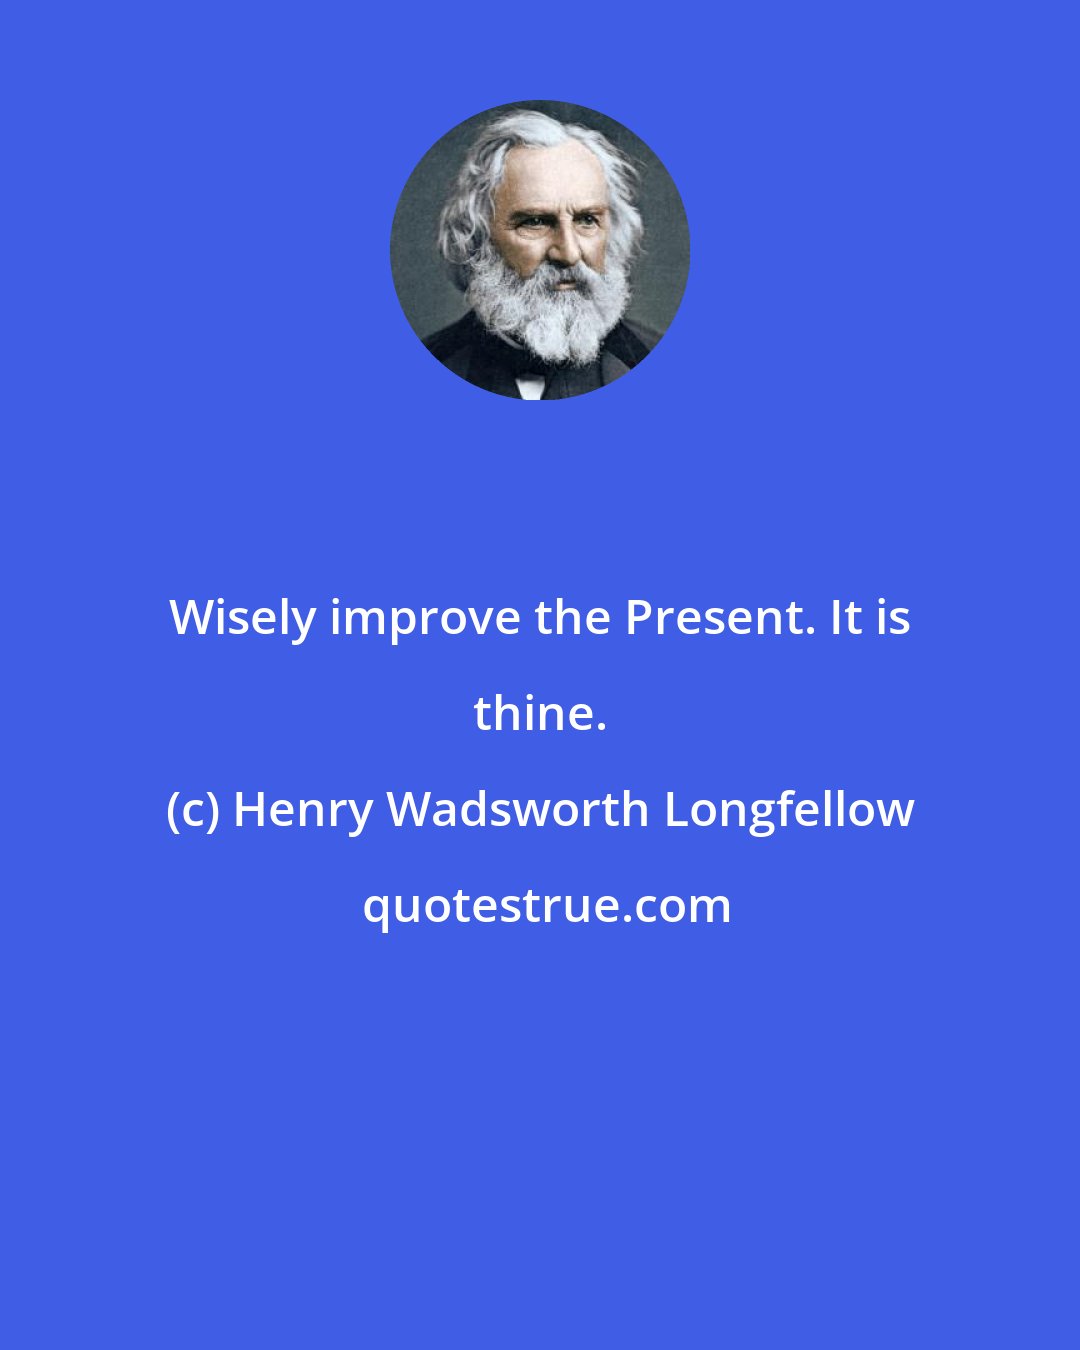 Henry Wadsworth Longfellow: Wisely improve the Present. It is thine.